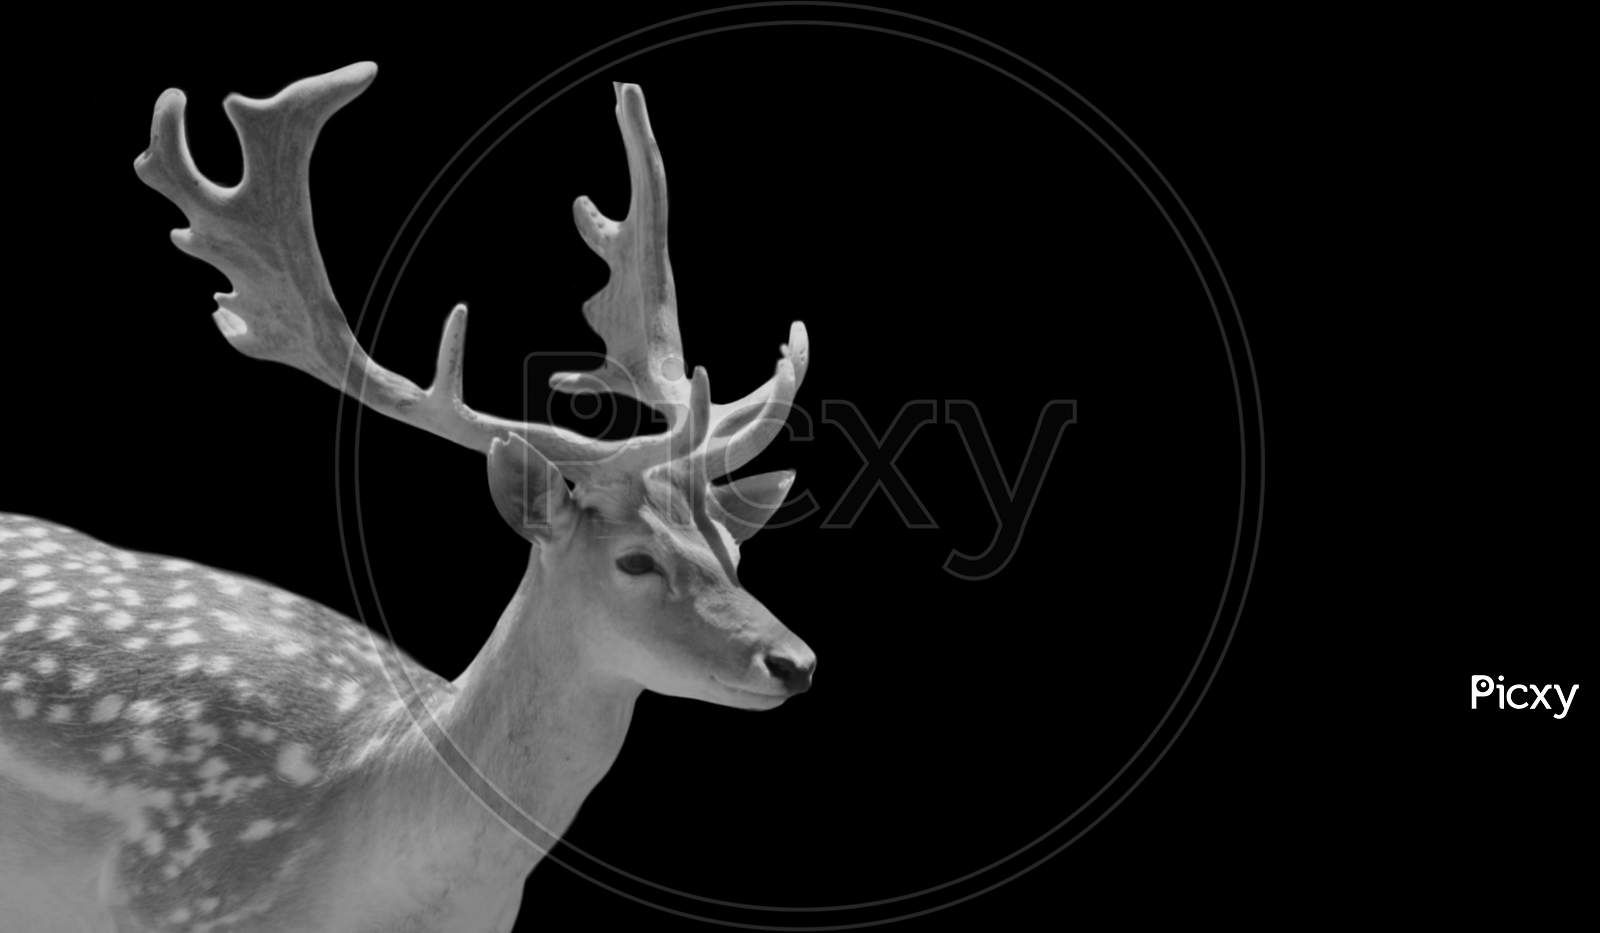 Black And White Deer With Big Antlers Portrait In The Black Background